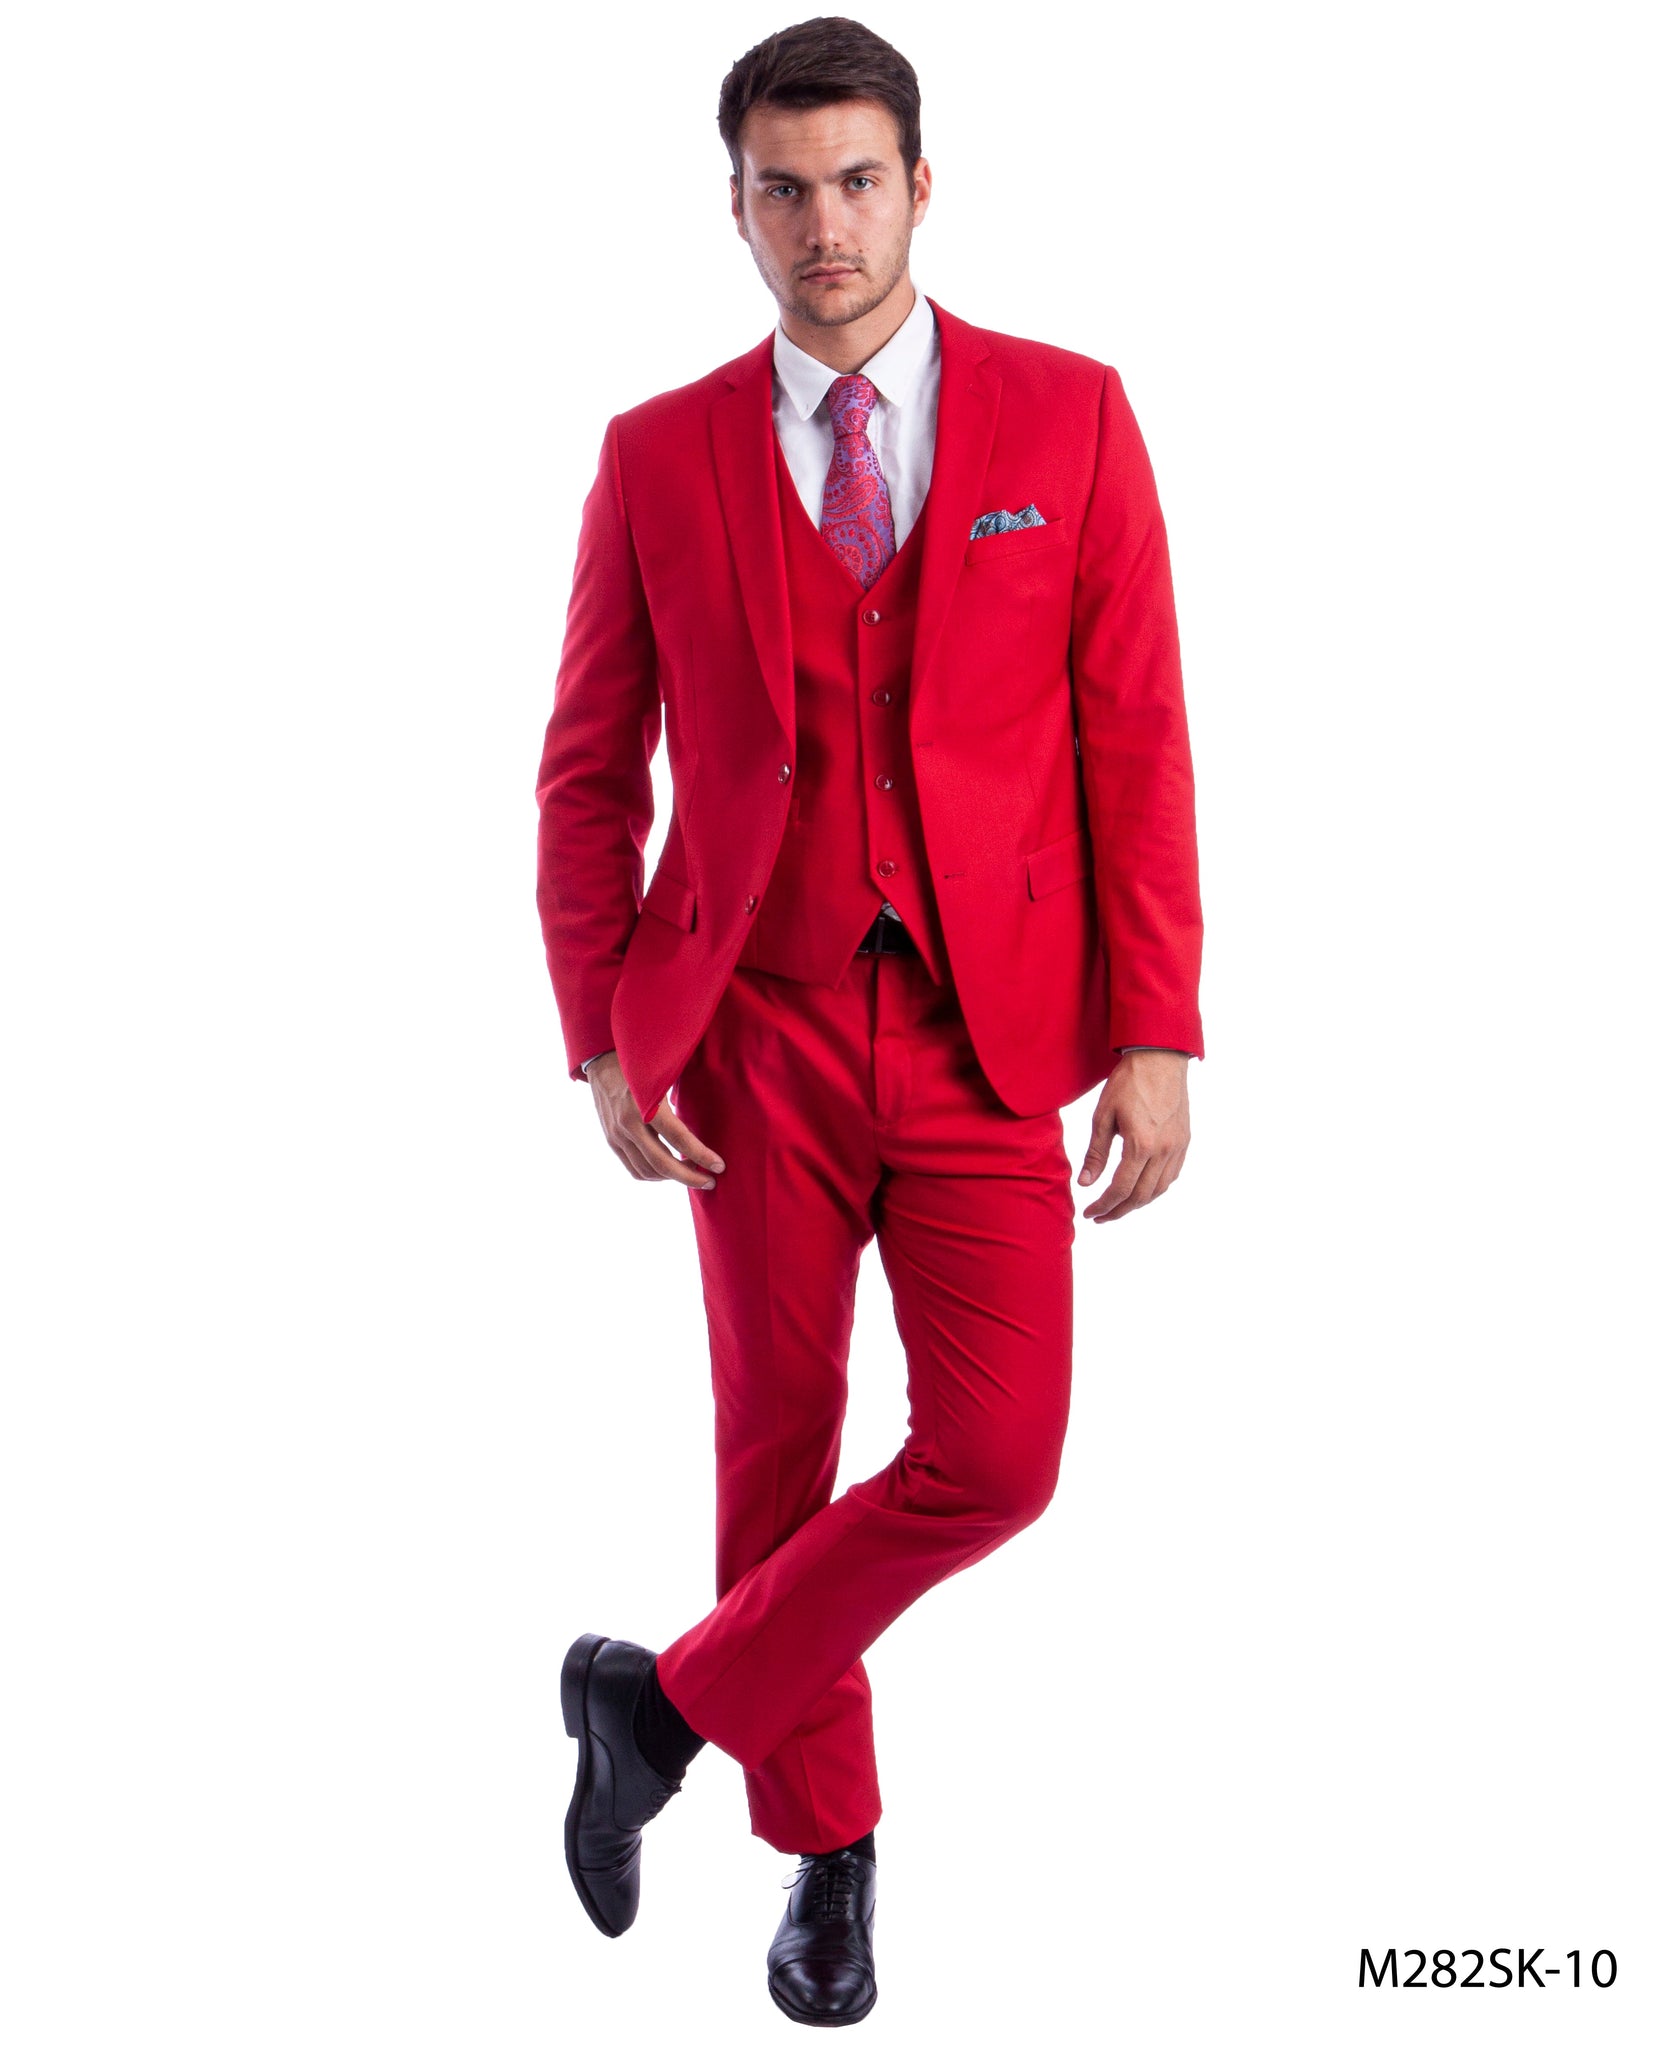 Red Suit For Men Formal Suits For All Ocassions